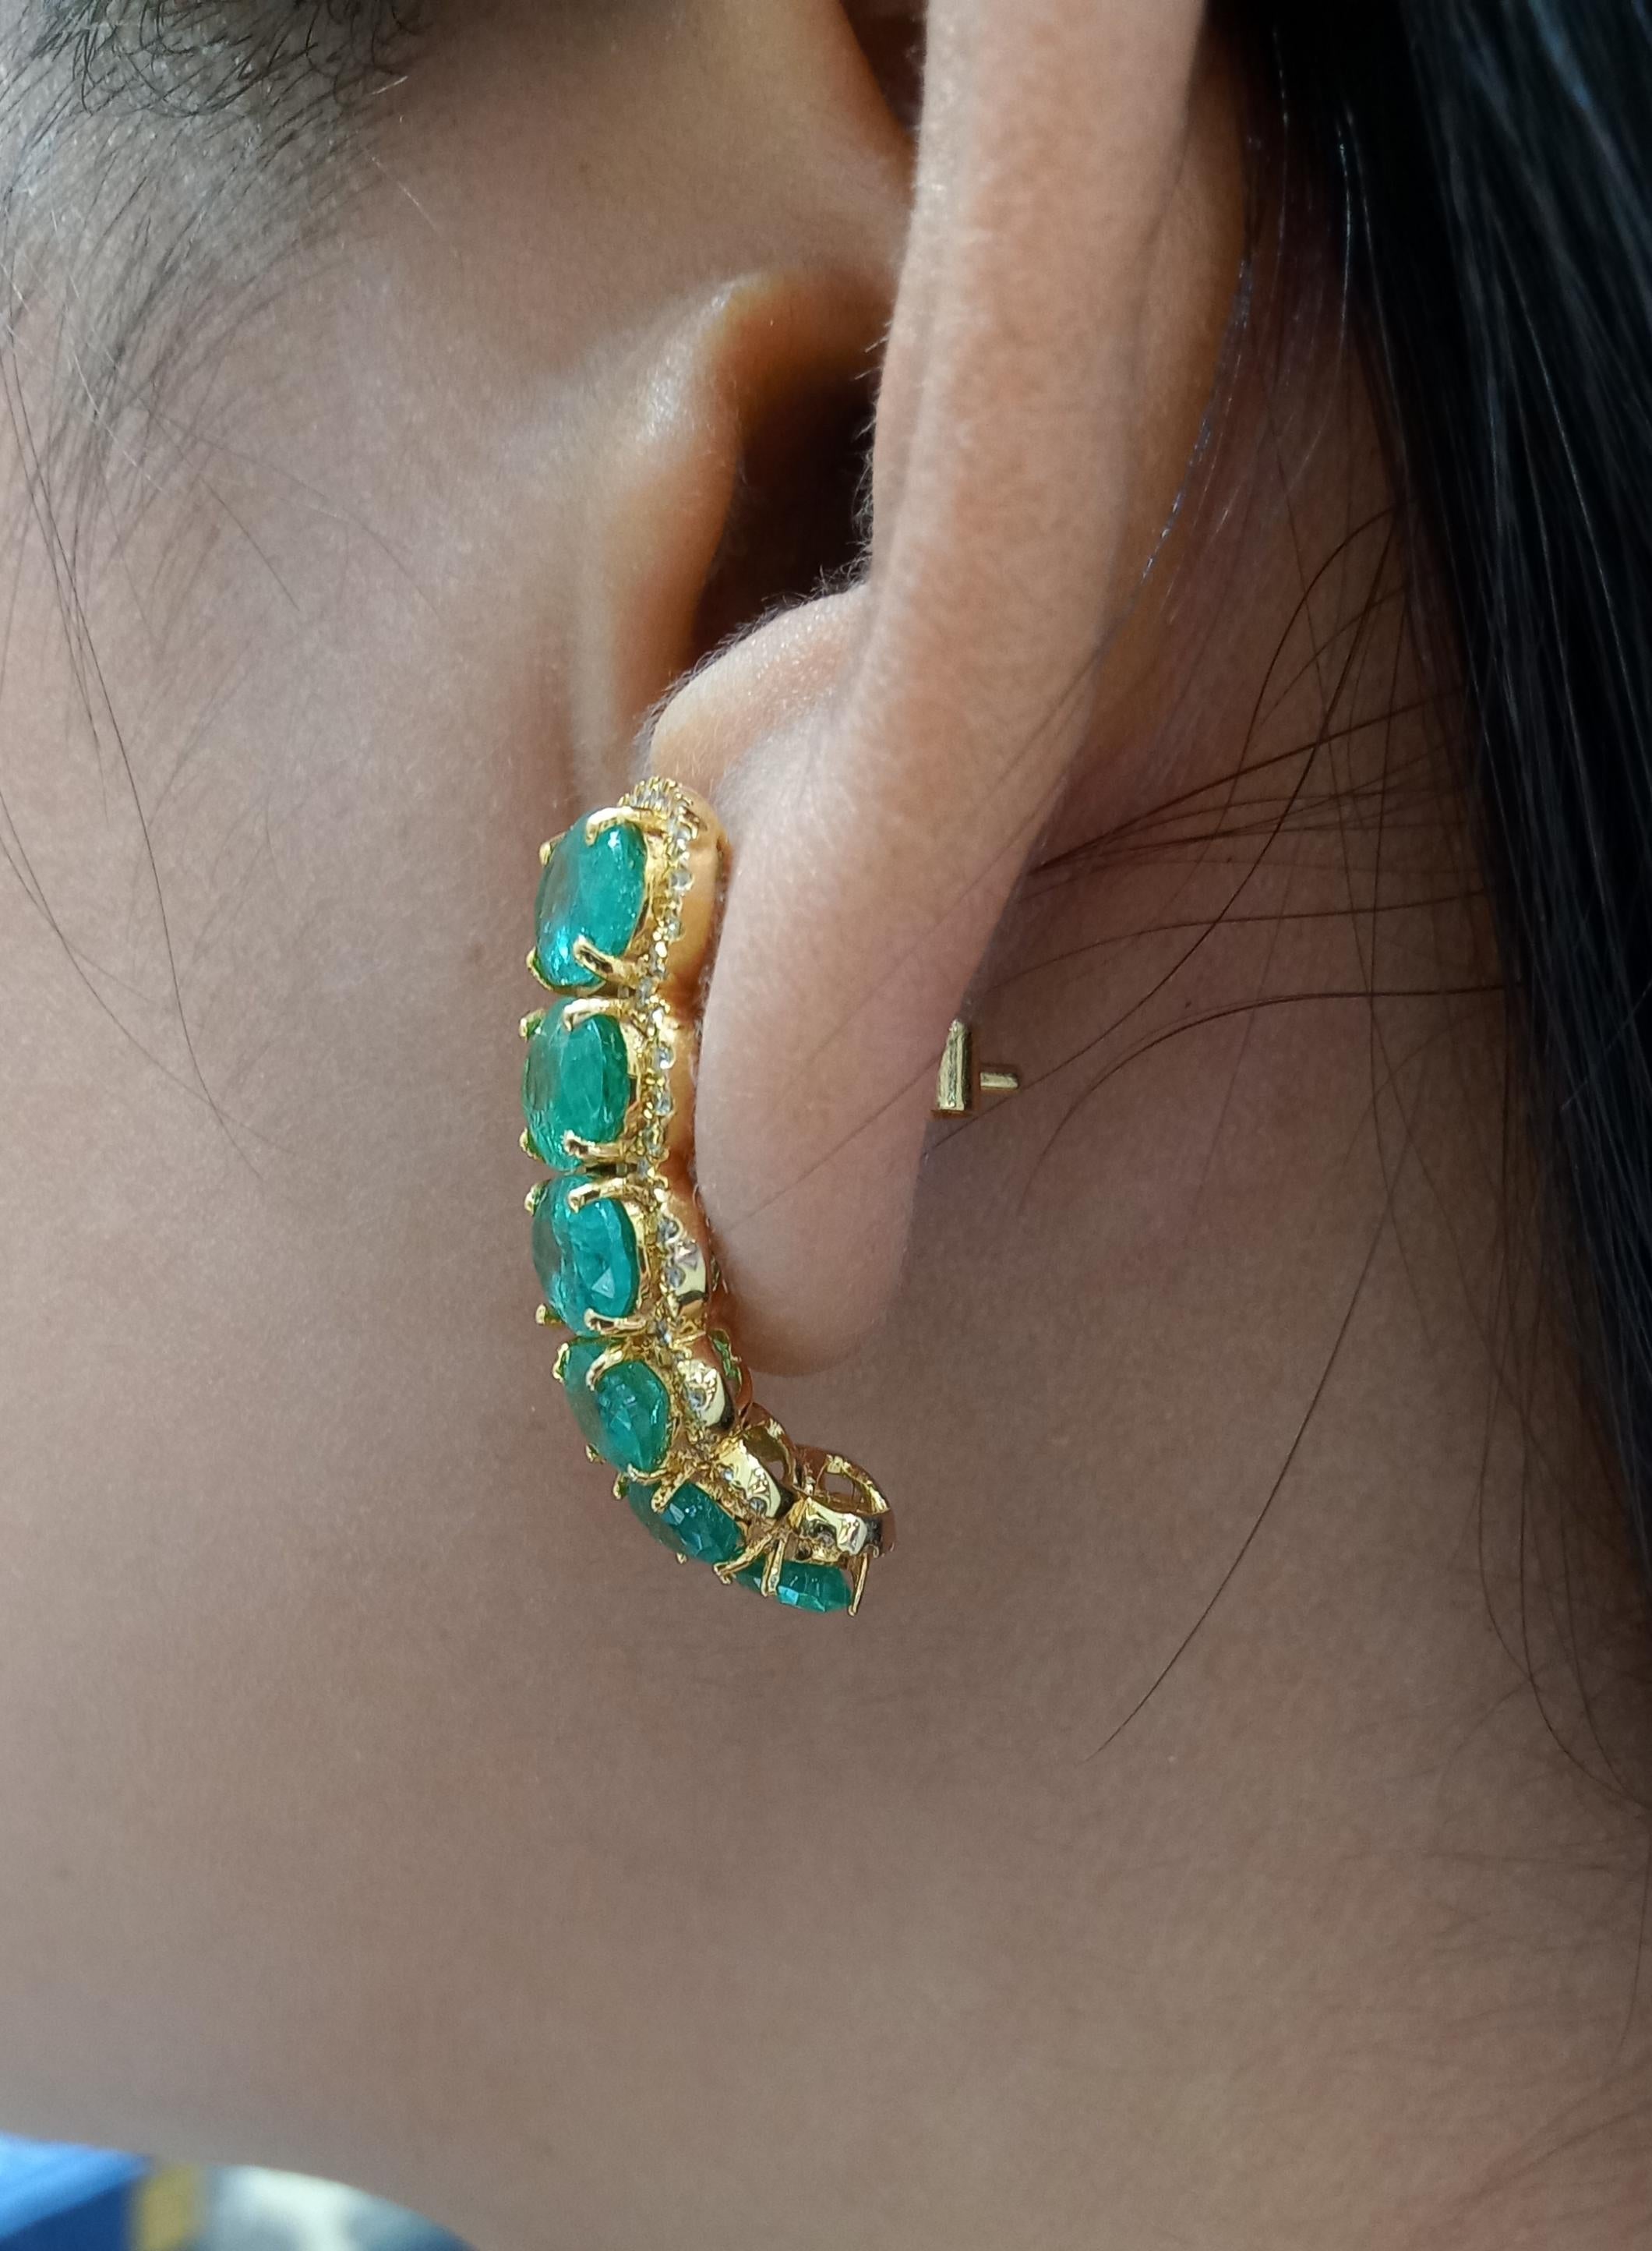 Some pieces of jewelry never goes out of style.

Gold Weight-6.451gms
Diamond Weight-0.67 carats
Emerald Weight-5.90 carats